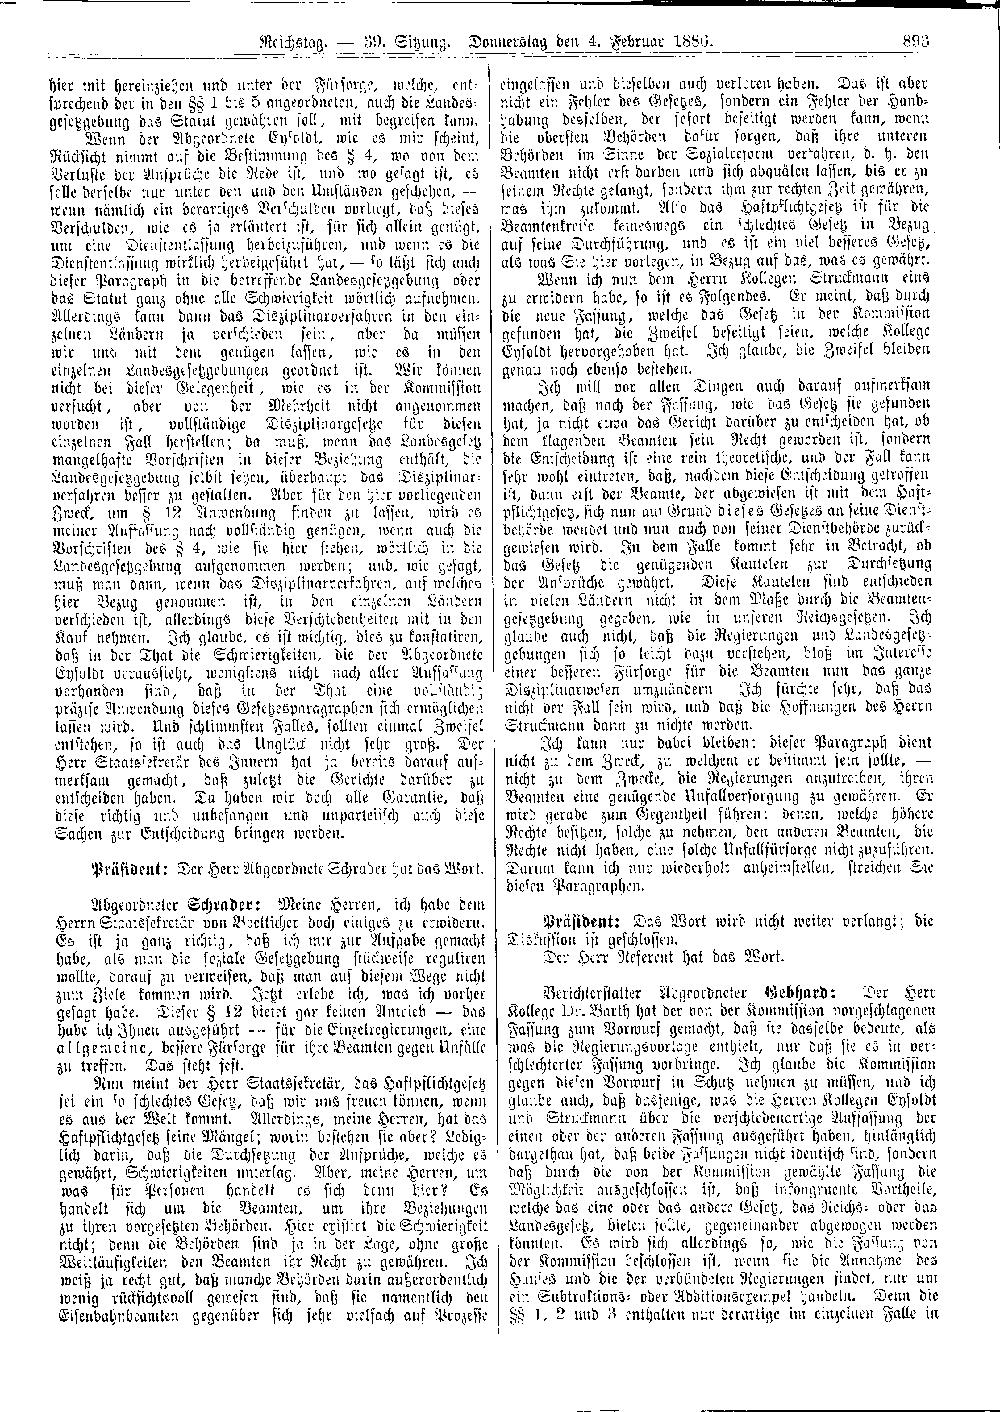 Scan of page 893